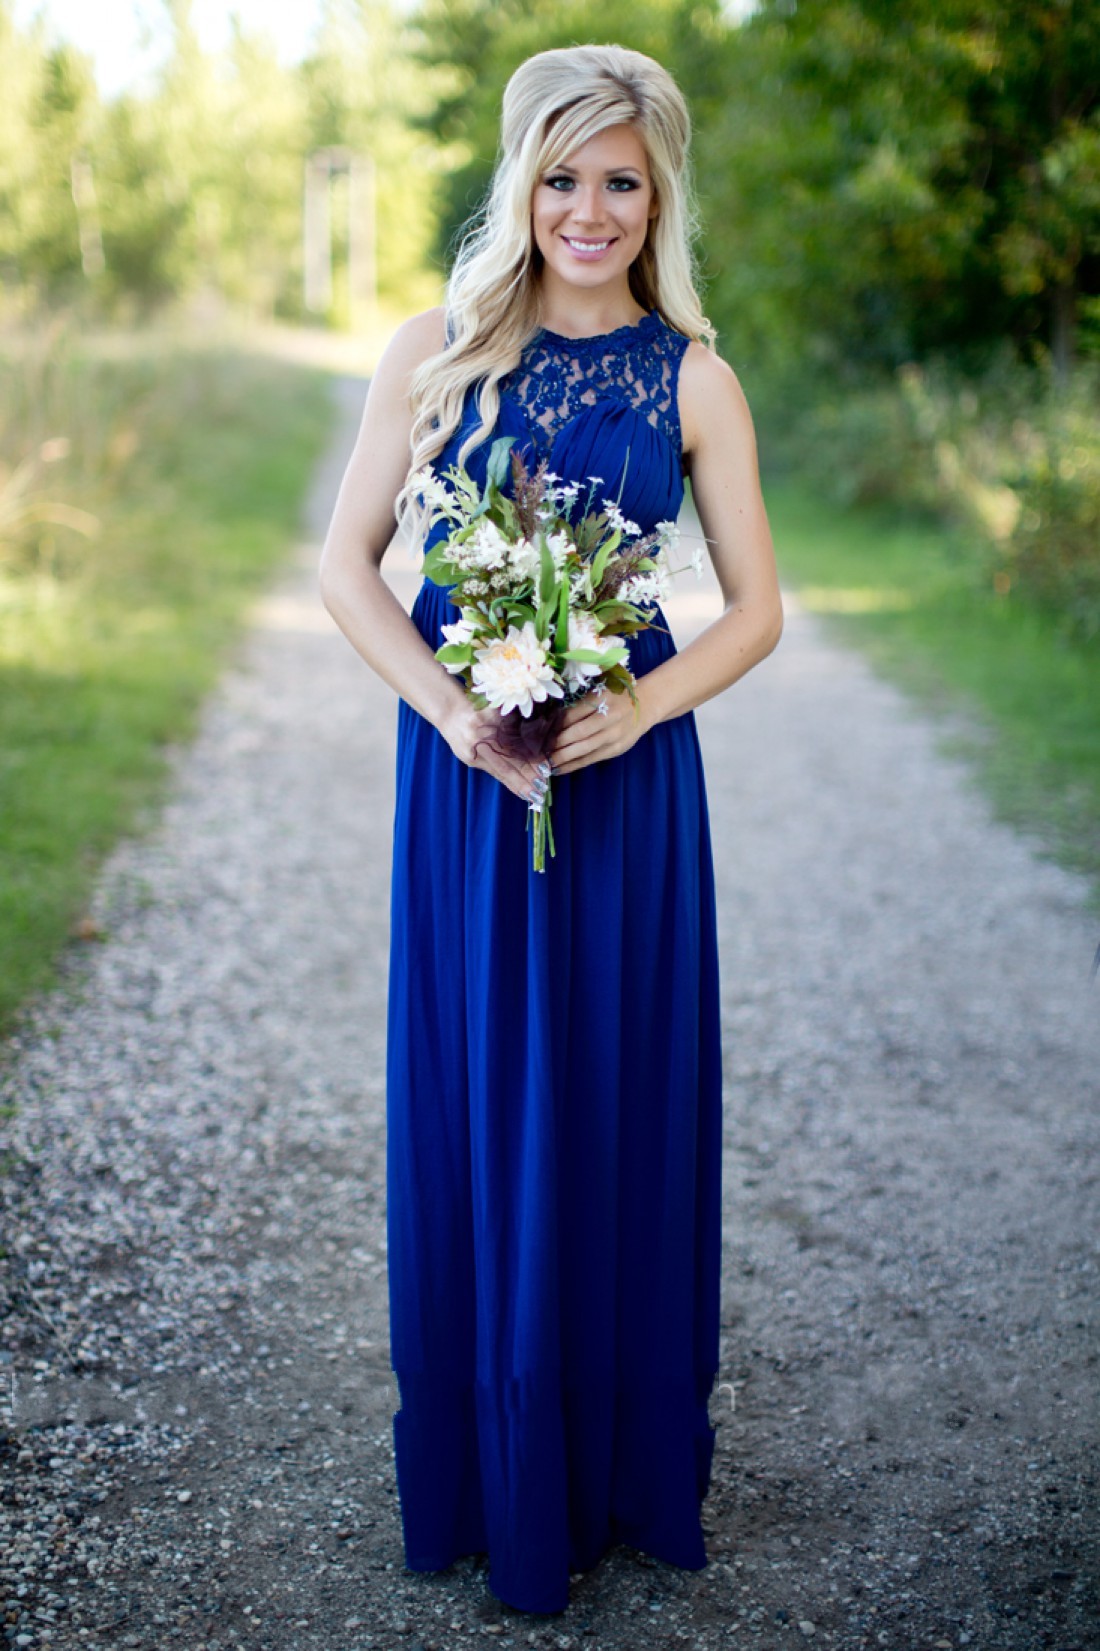 

2020 Country Royal Blue Bridesmaid Dresses For Weddings Chiffon Lace Illusion Jewel Neck Beads Plus Size Party Maid Of Honor Gowns Under 100